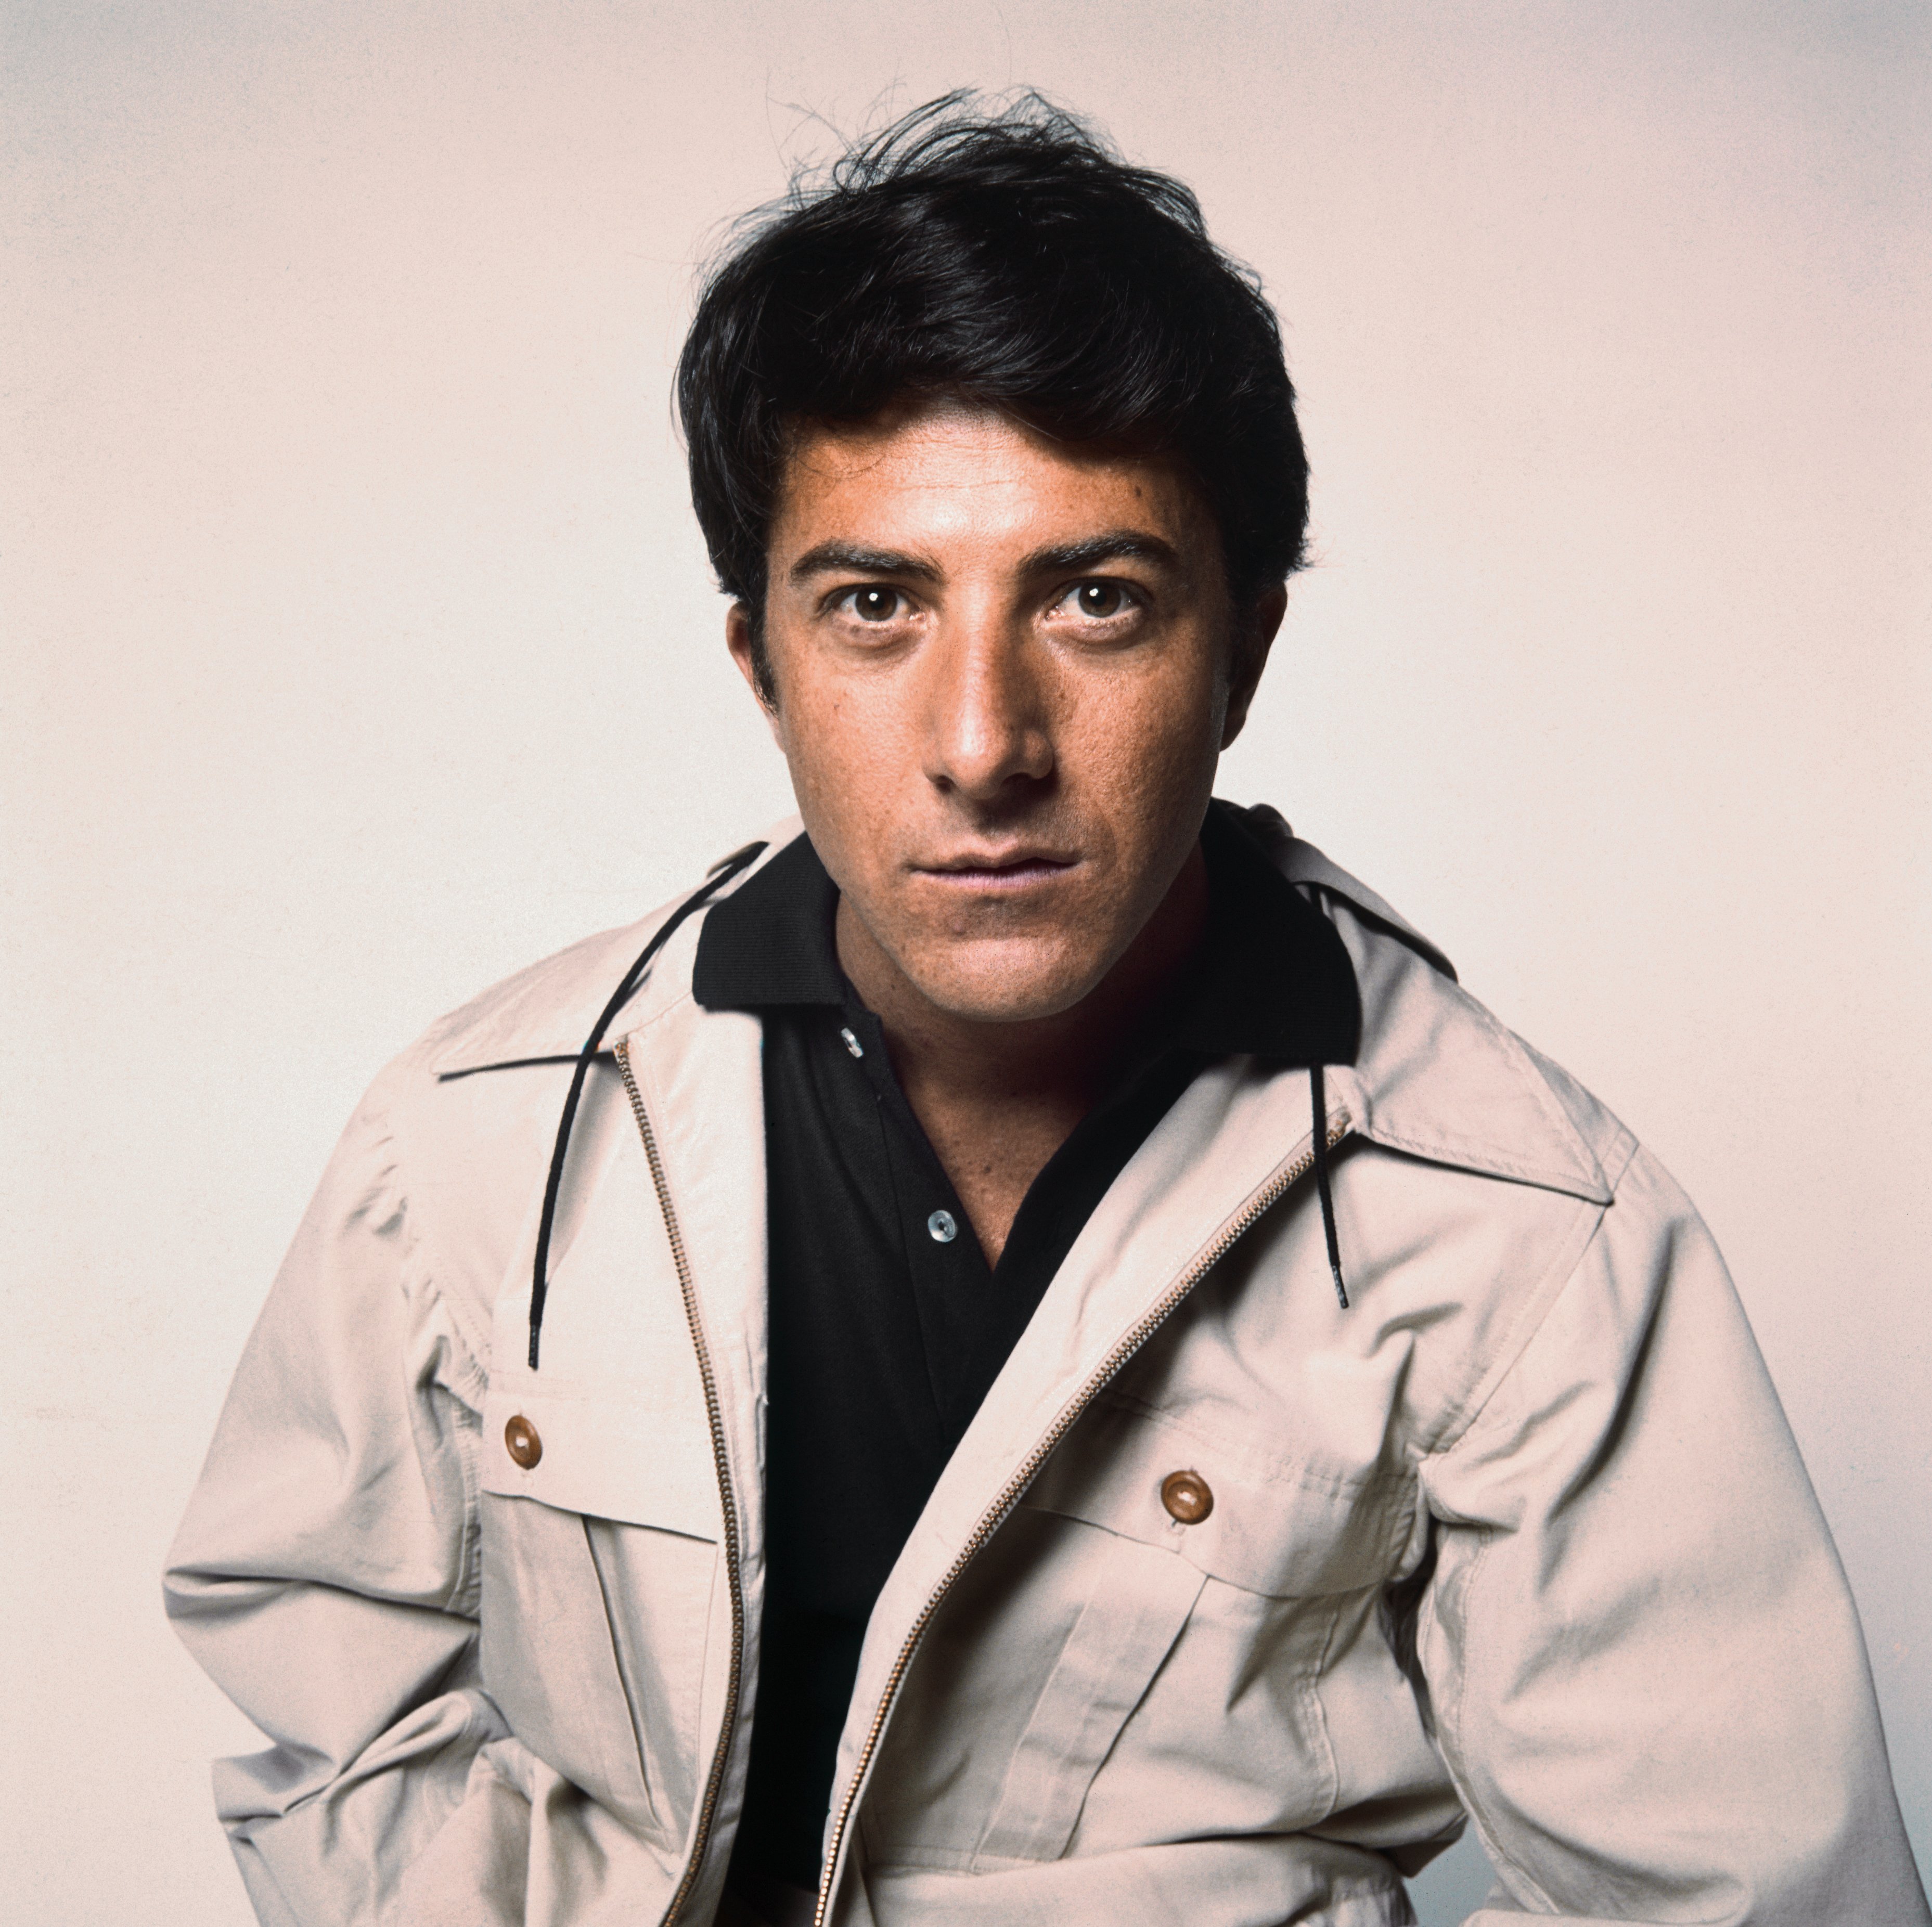 A shot of actor Dustin Hoffman as he appeared in "The Graduate." | Source: Getty Images